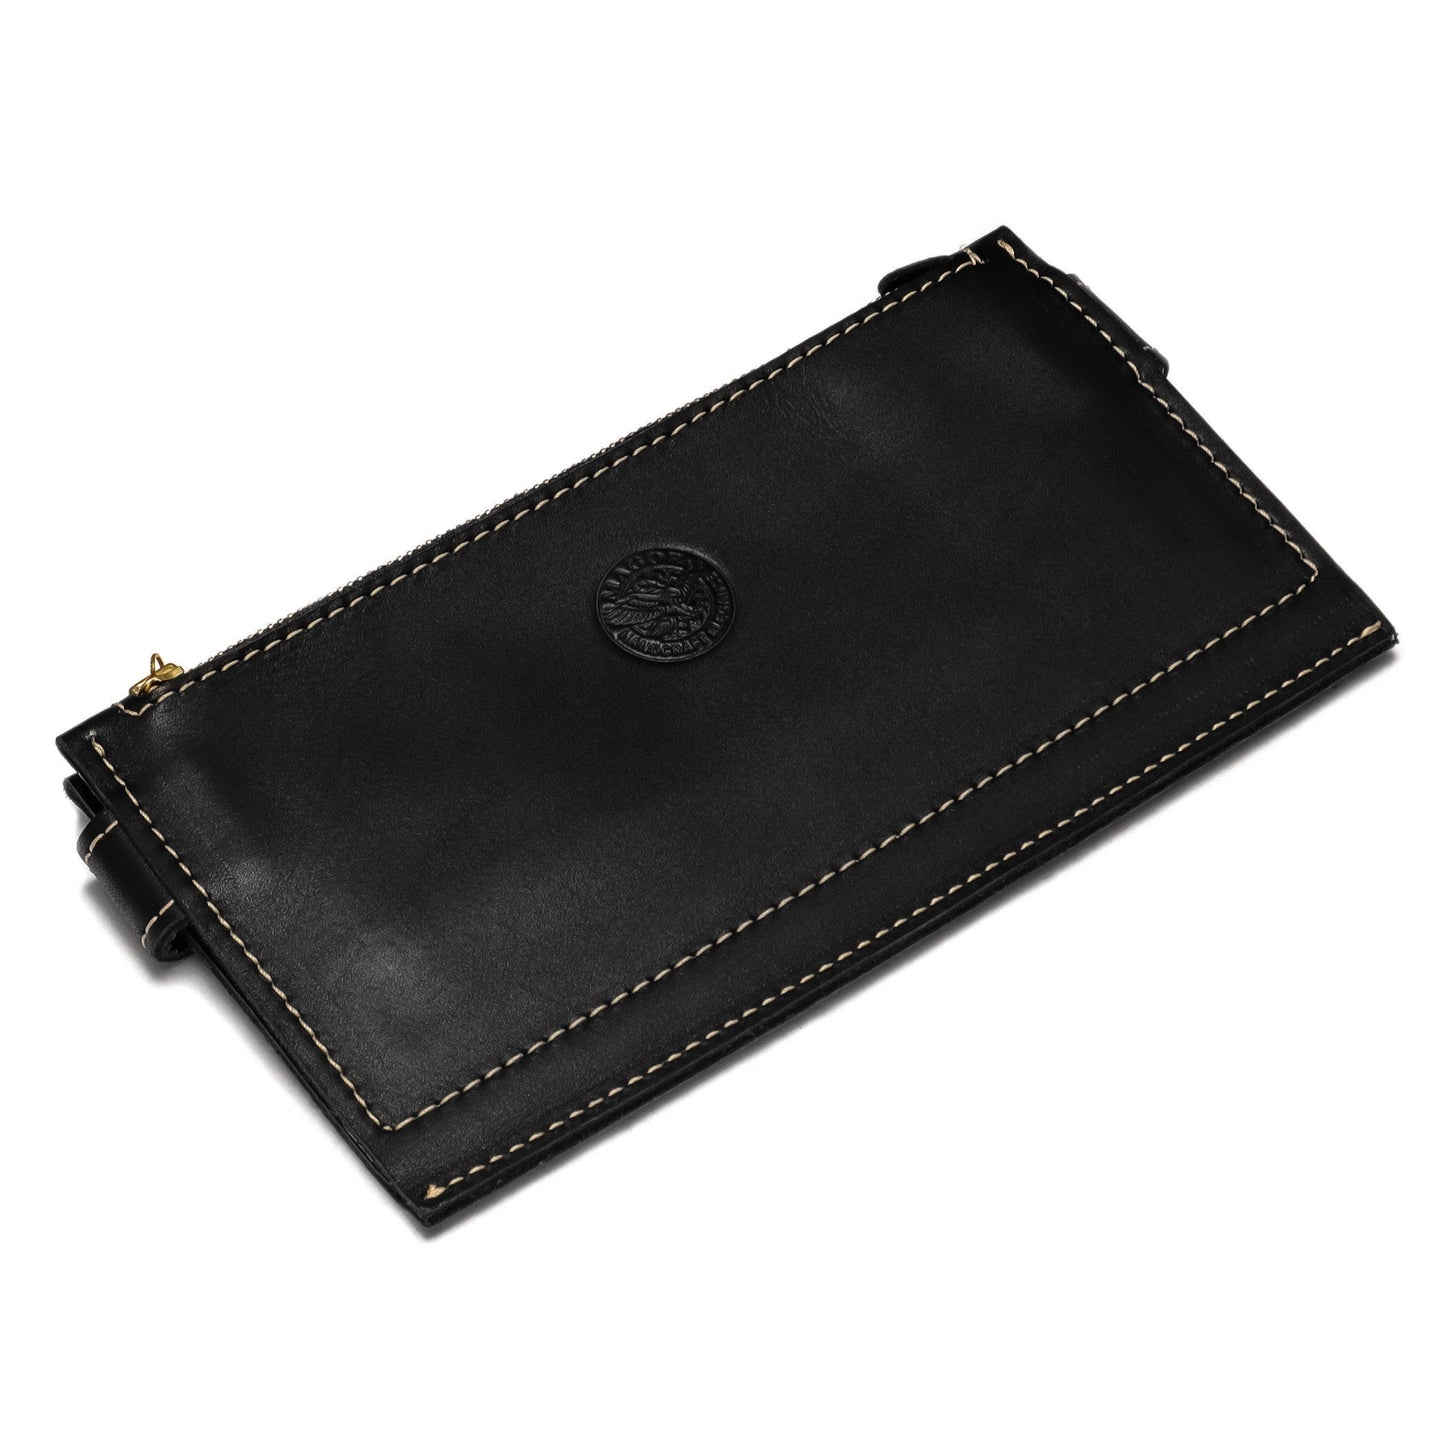 Leather Wallet-Large Capacity | Long Genuine Leather Wallet With Card Holder | Zip Coin Pocket | Passport Travel Holder | gift ideas